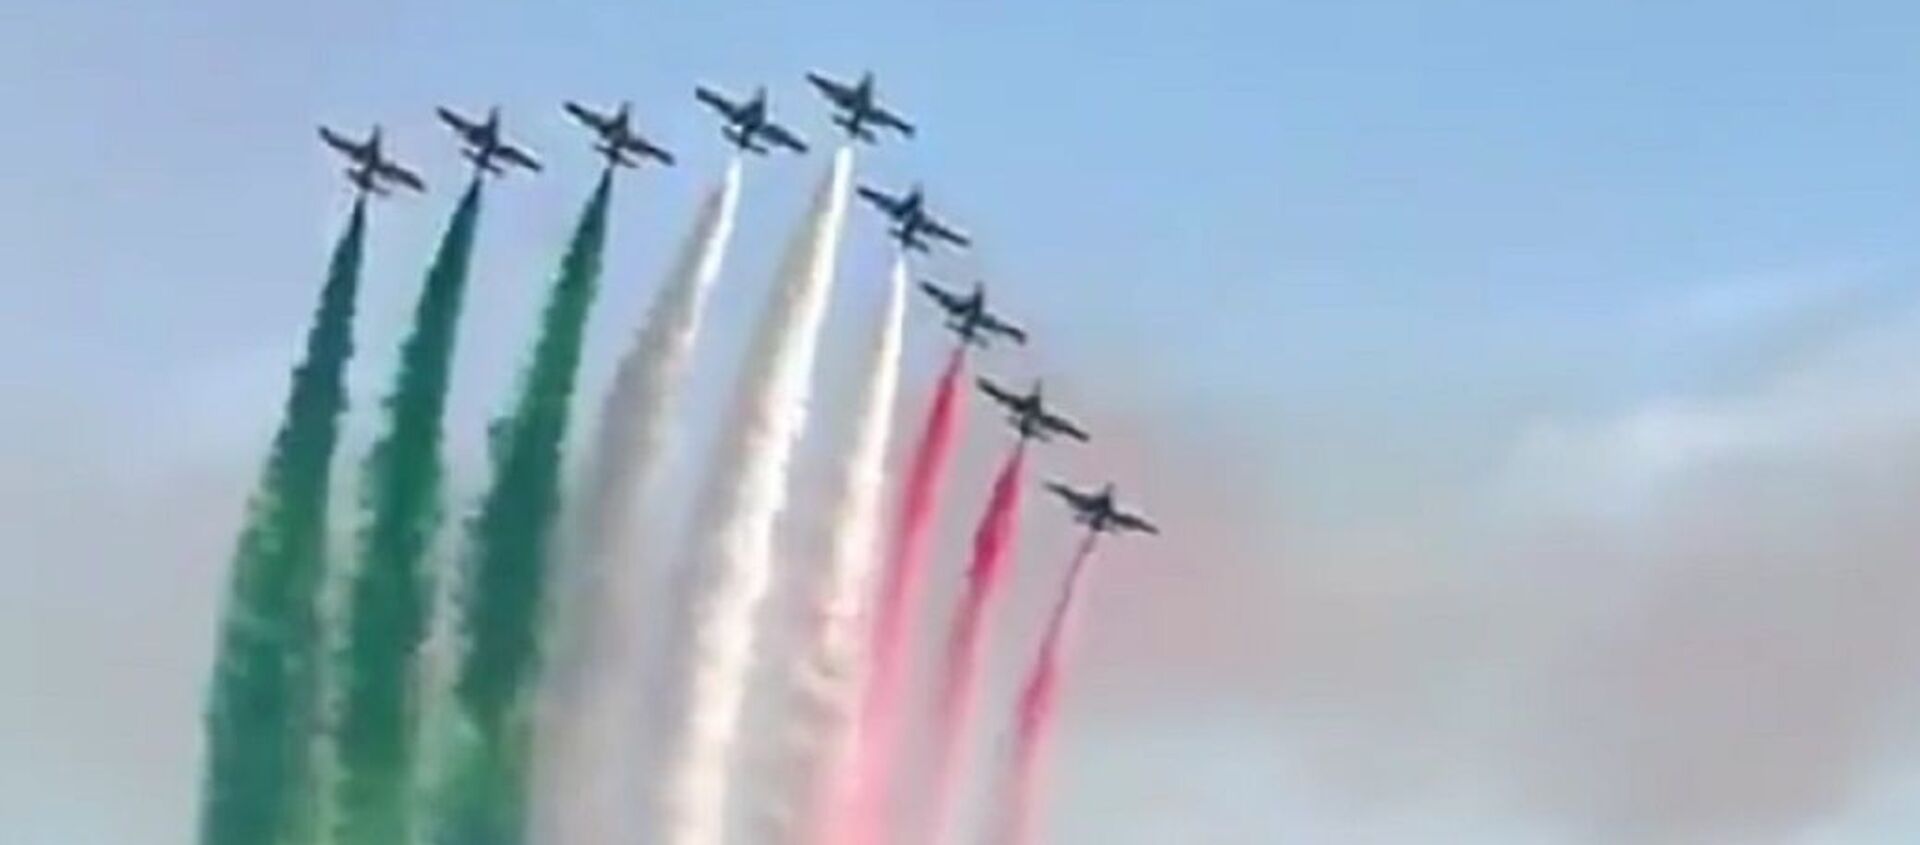 The Italian Air Force played Pavarotti singing Nessun Dorma as they put on an air show to lift the spirits of their nation - Sputnik International, 1920, 30.06.2021